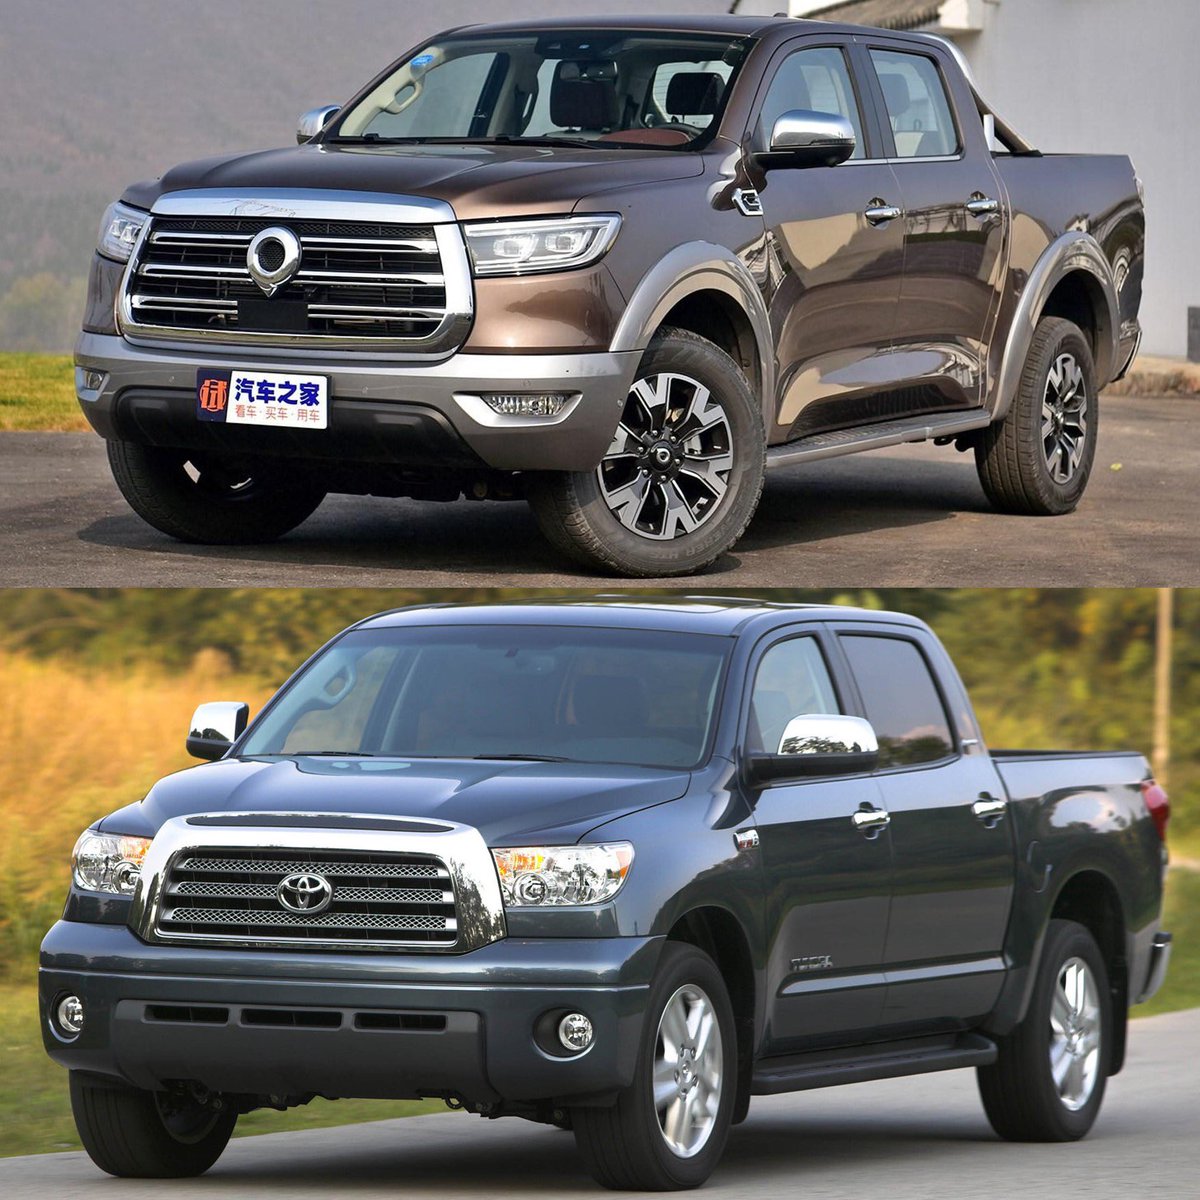 Car Industry Analysis Great Wall S Pao Model Is The First Ever Pickup From A Chinese Brand To Be Classed As A Passenger Vehicle It Reminds Me The 07 Toyotatundra Especially